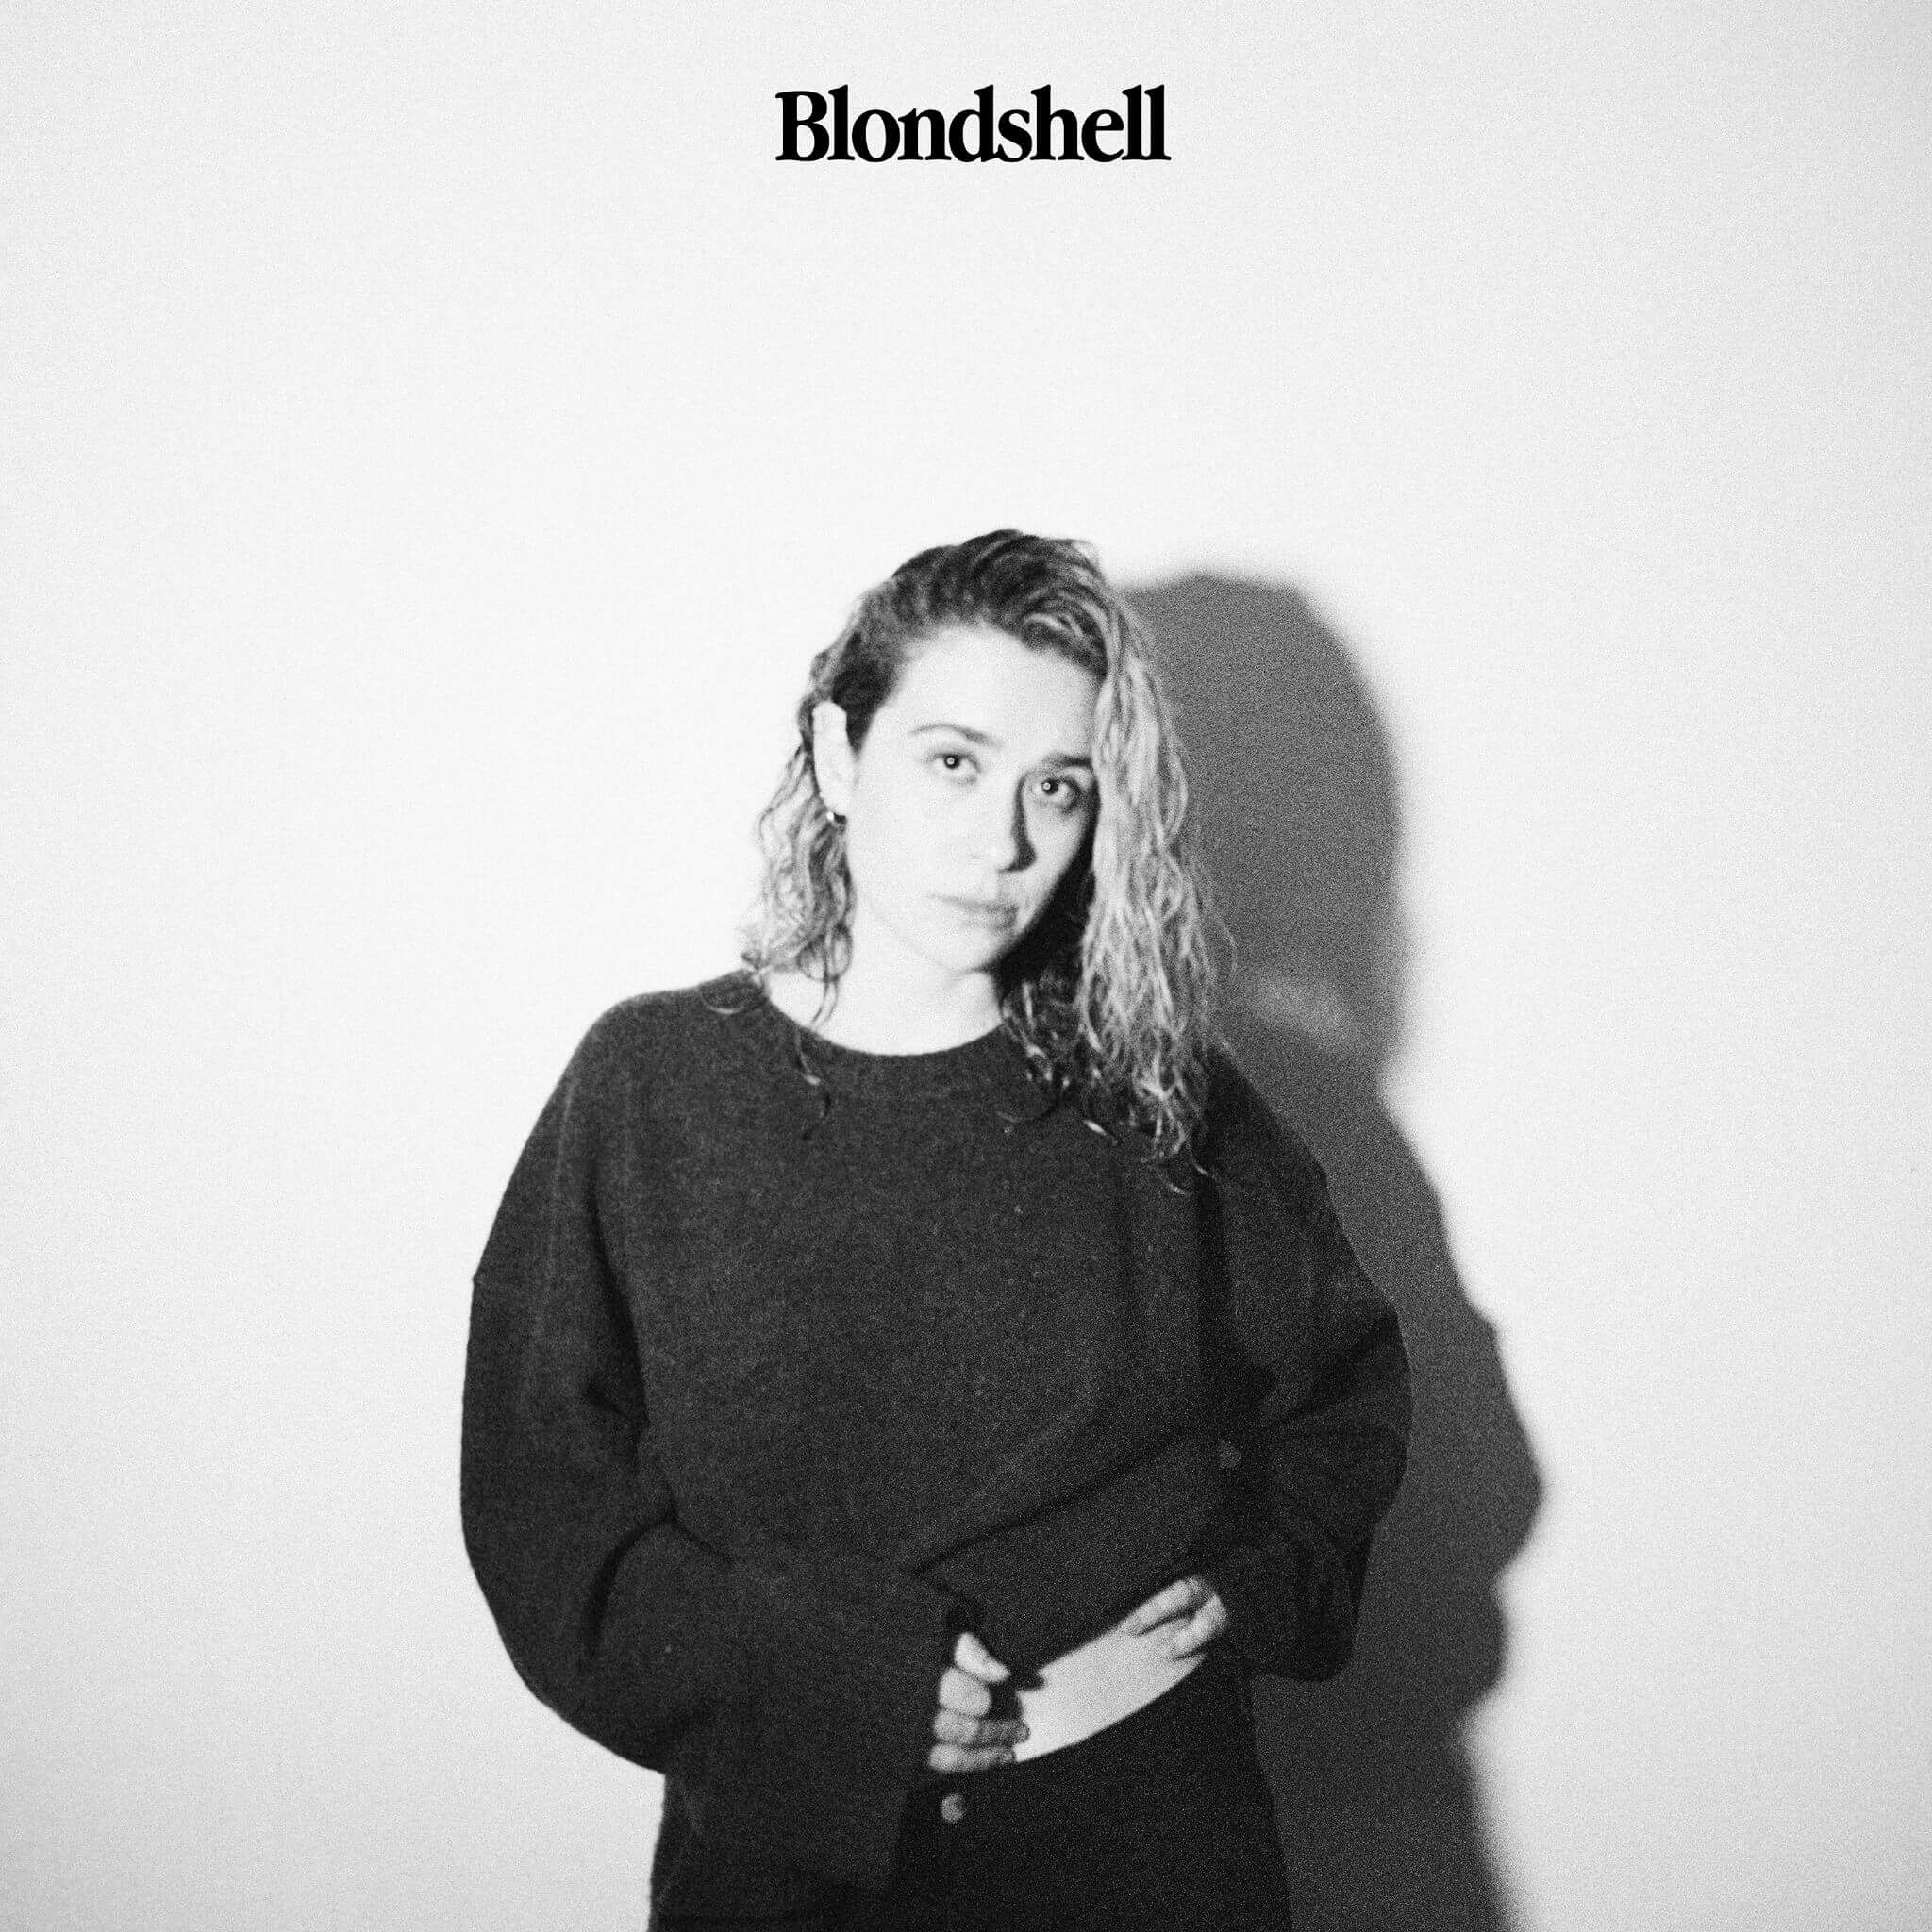 Blondshell by Blondshell Album review by Adam Fink for Northern Transmissions